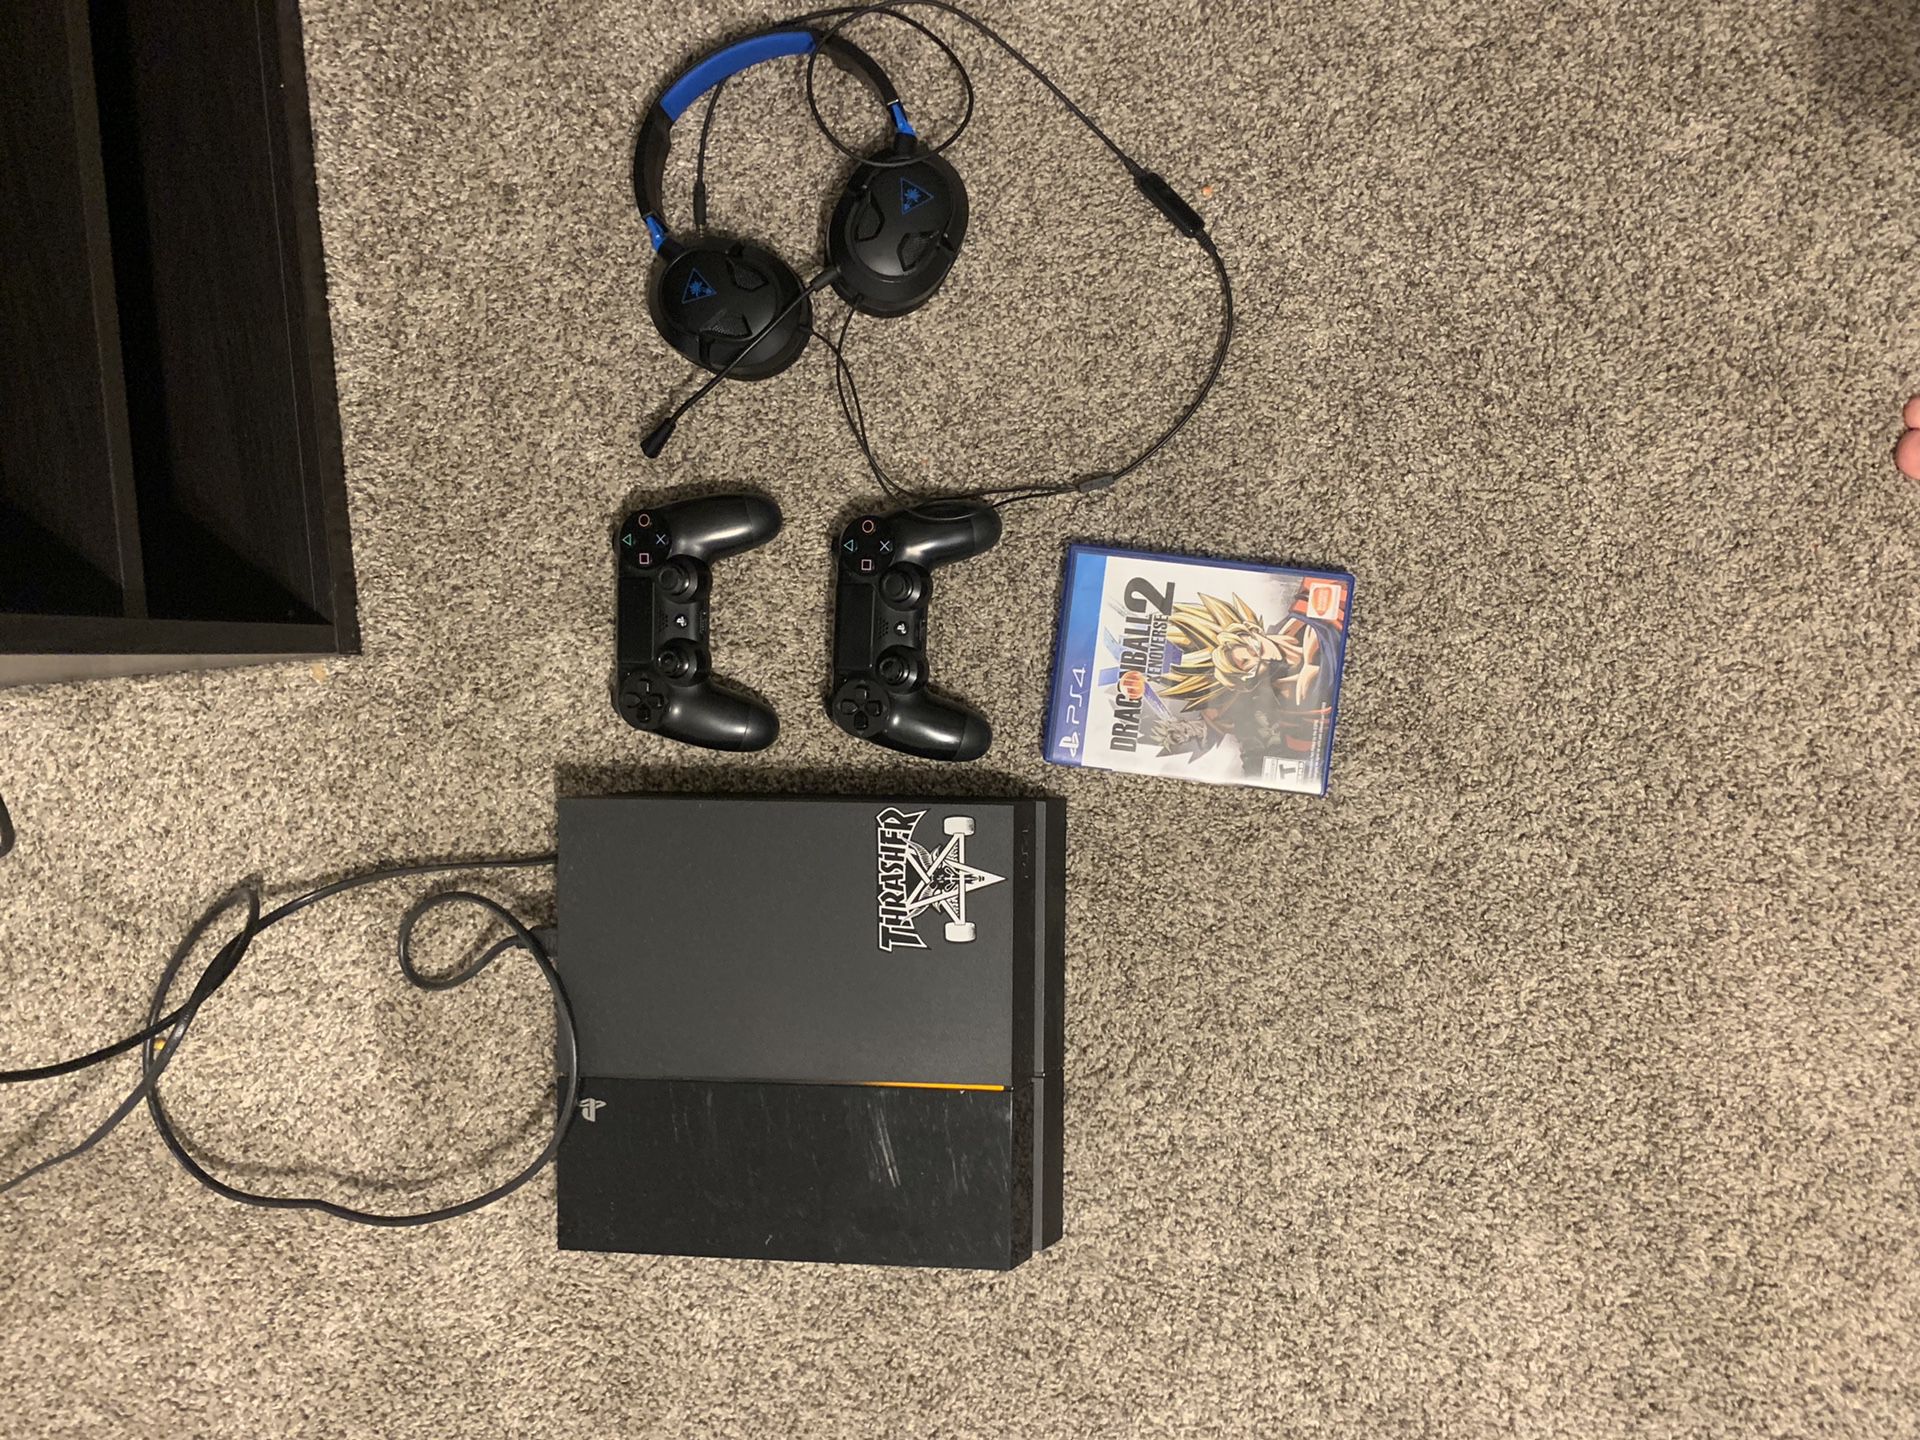 PS4, 2 controllers, 1 game, and headset